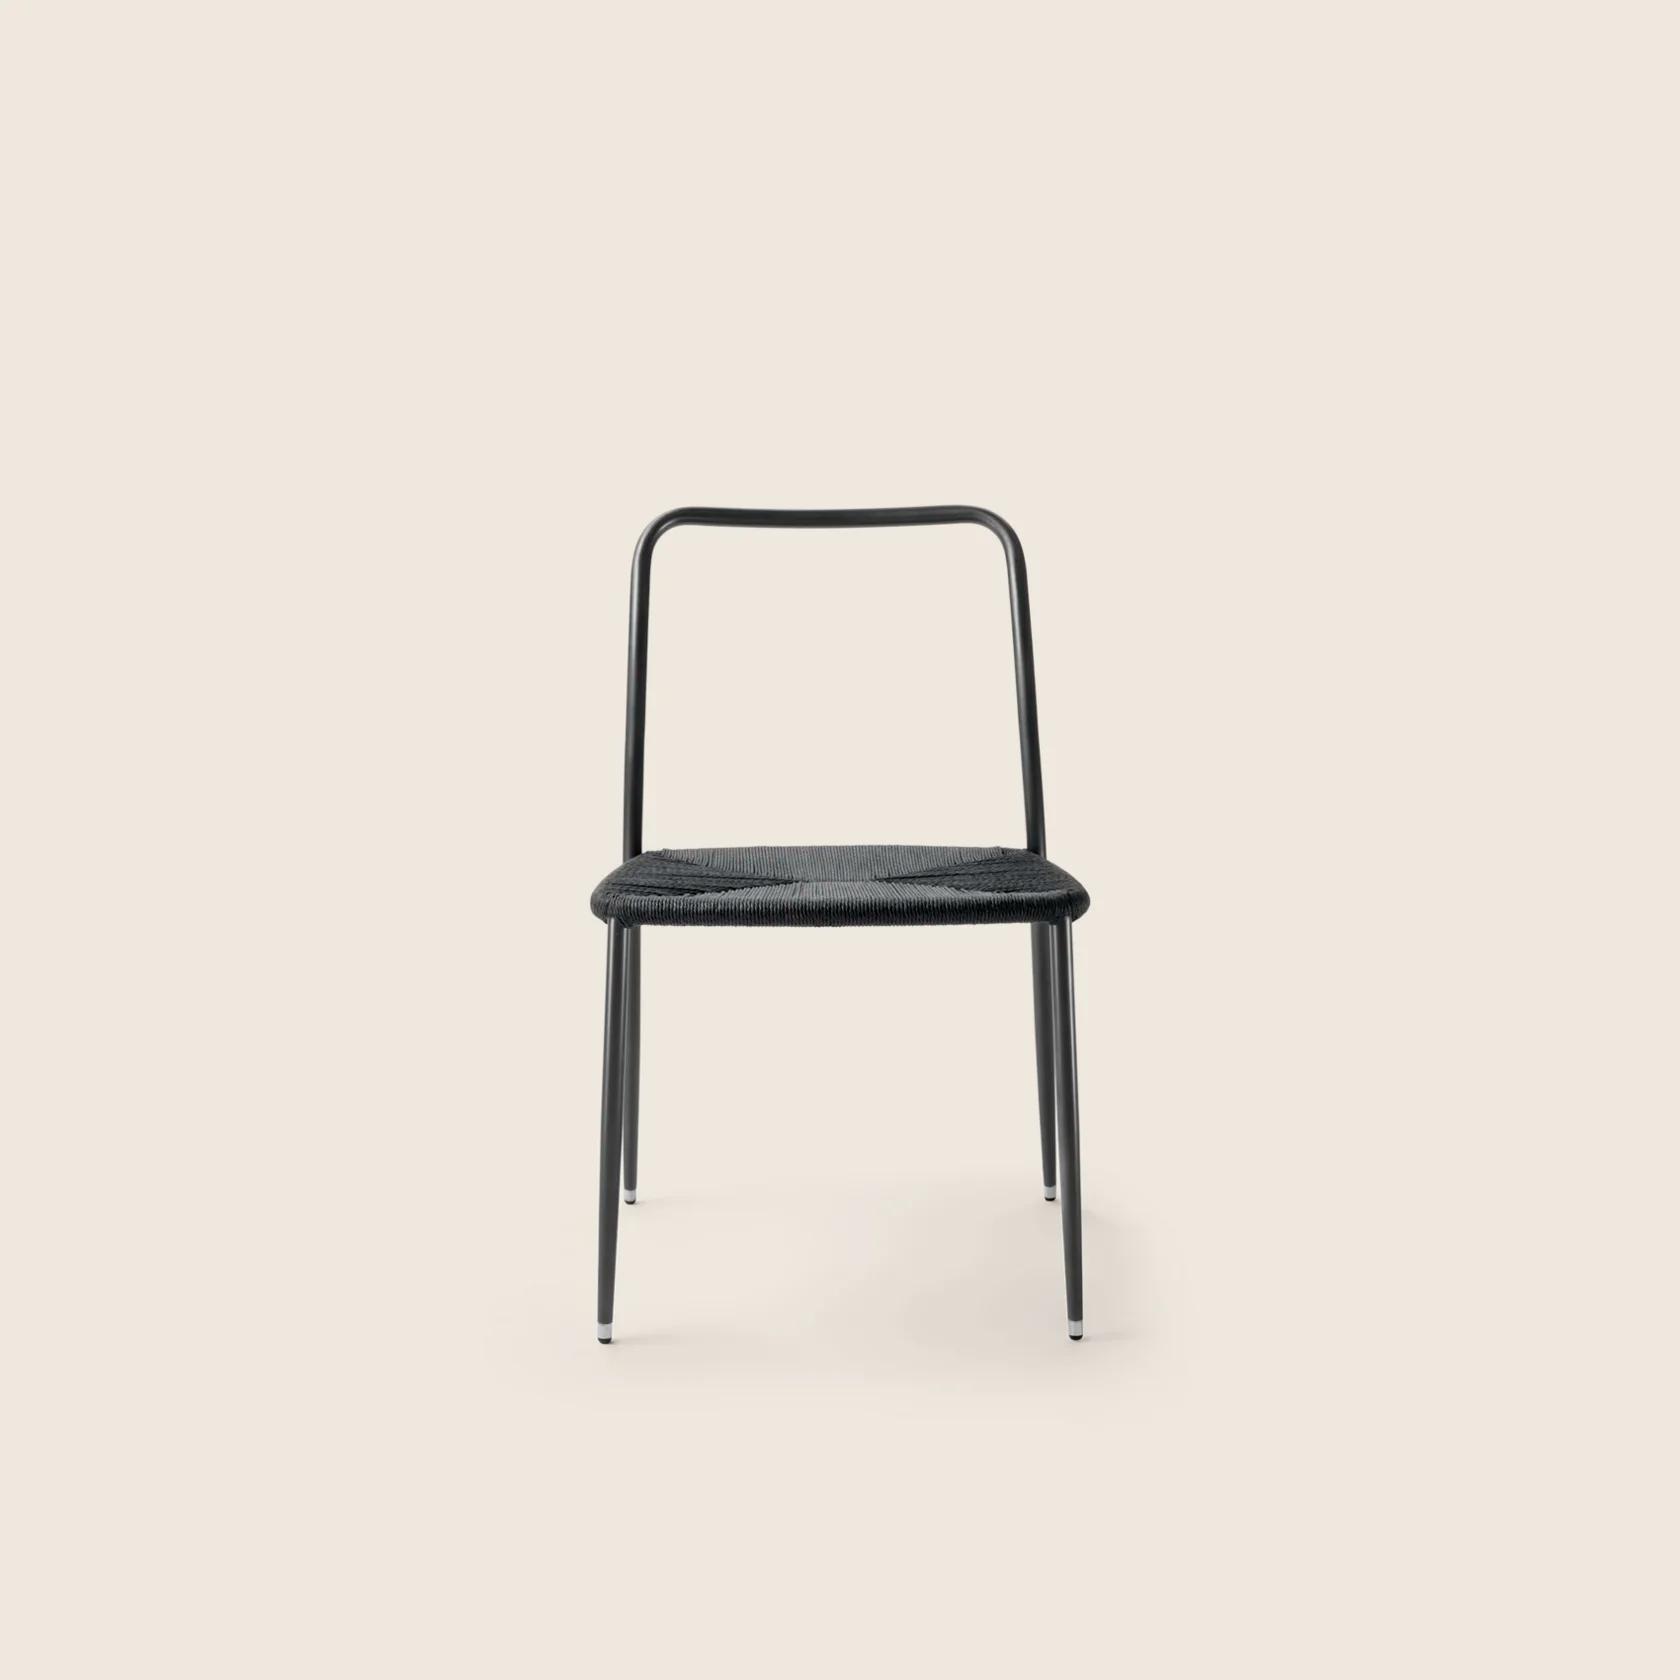 0281A1_FIRST STEPS OUTDOOR_CHAIR_02.png